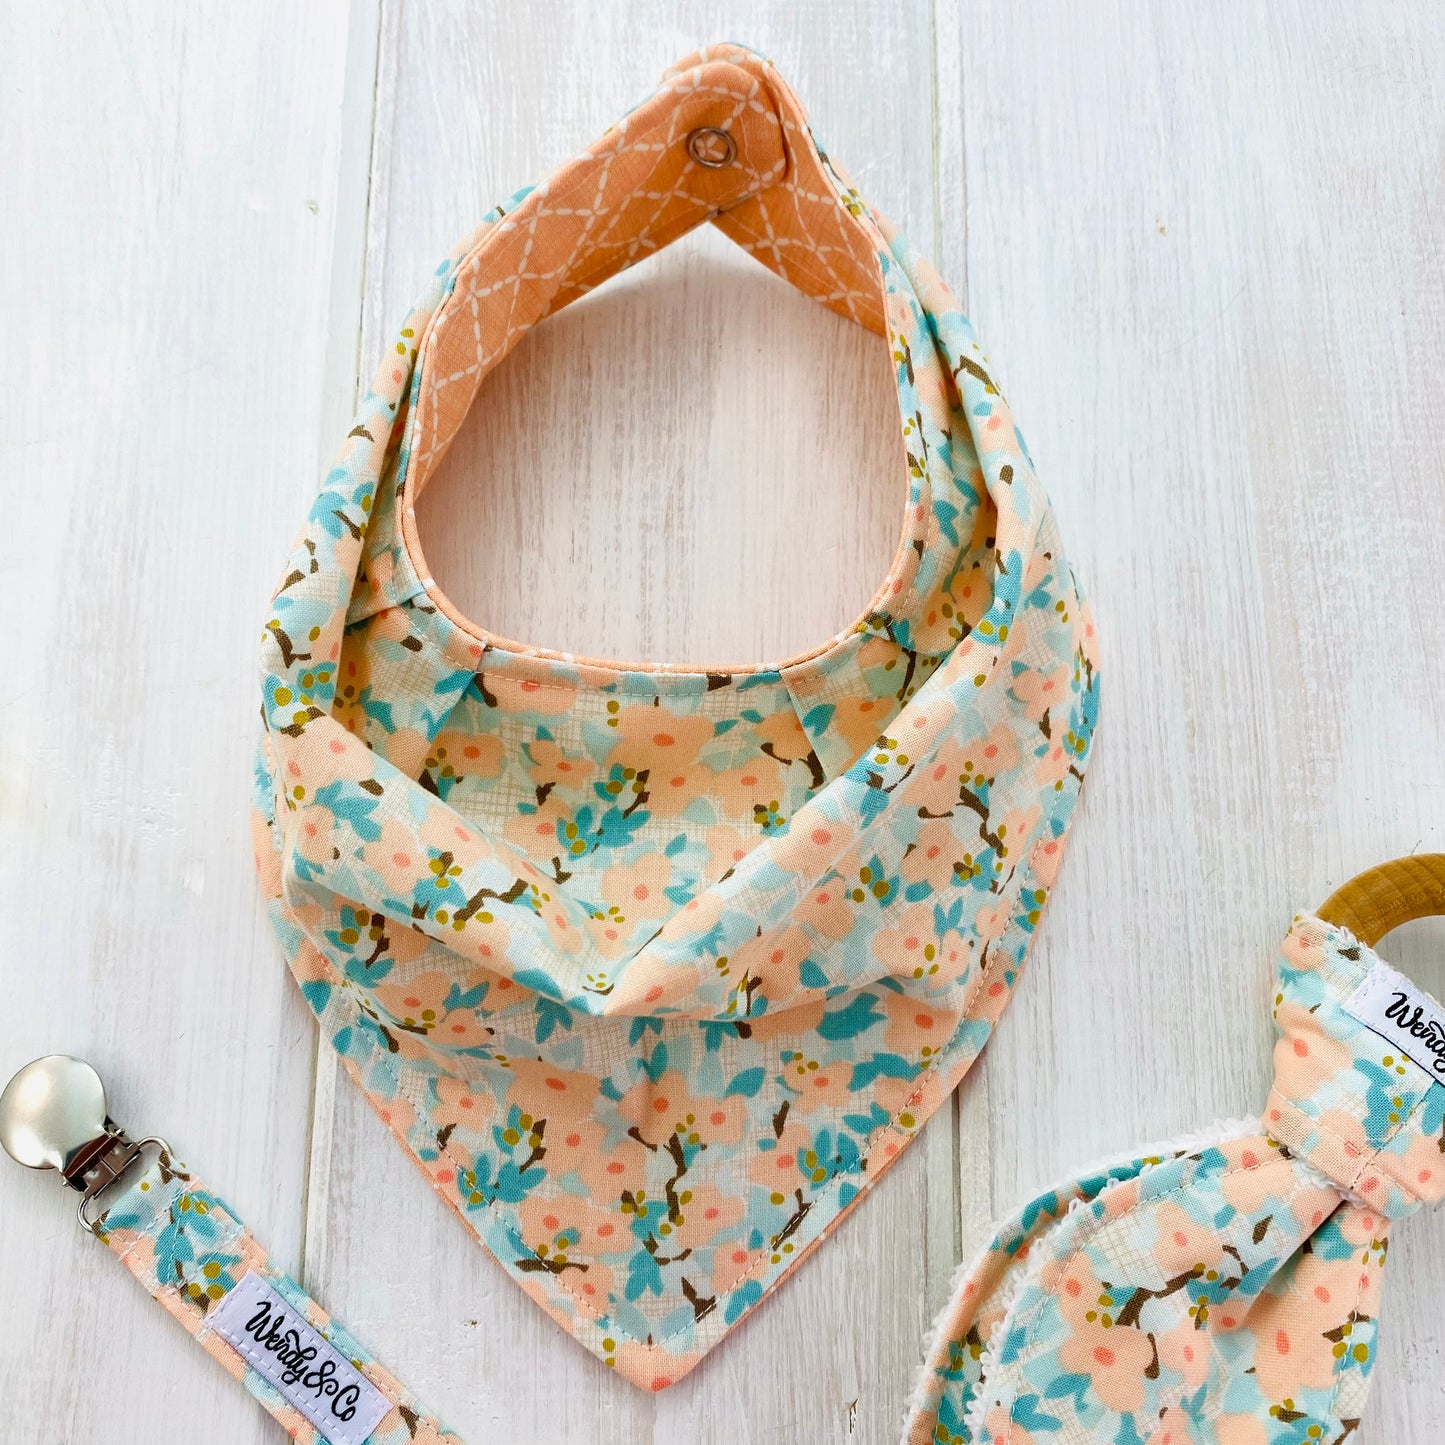 Handcrafted baby bib in peach and mint floral dogwood pattern.